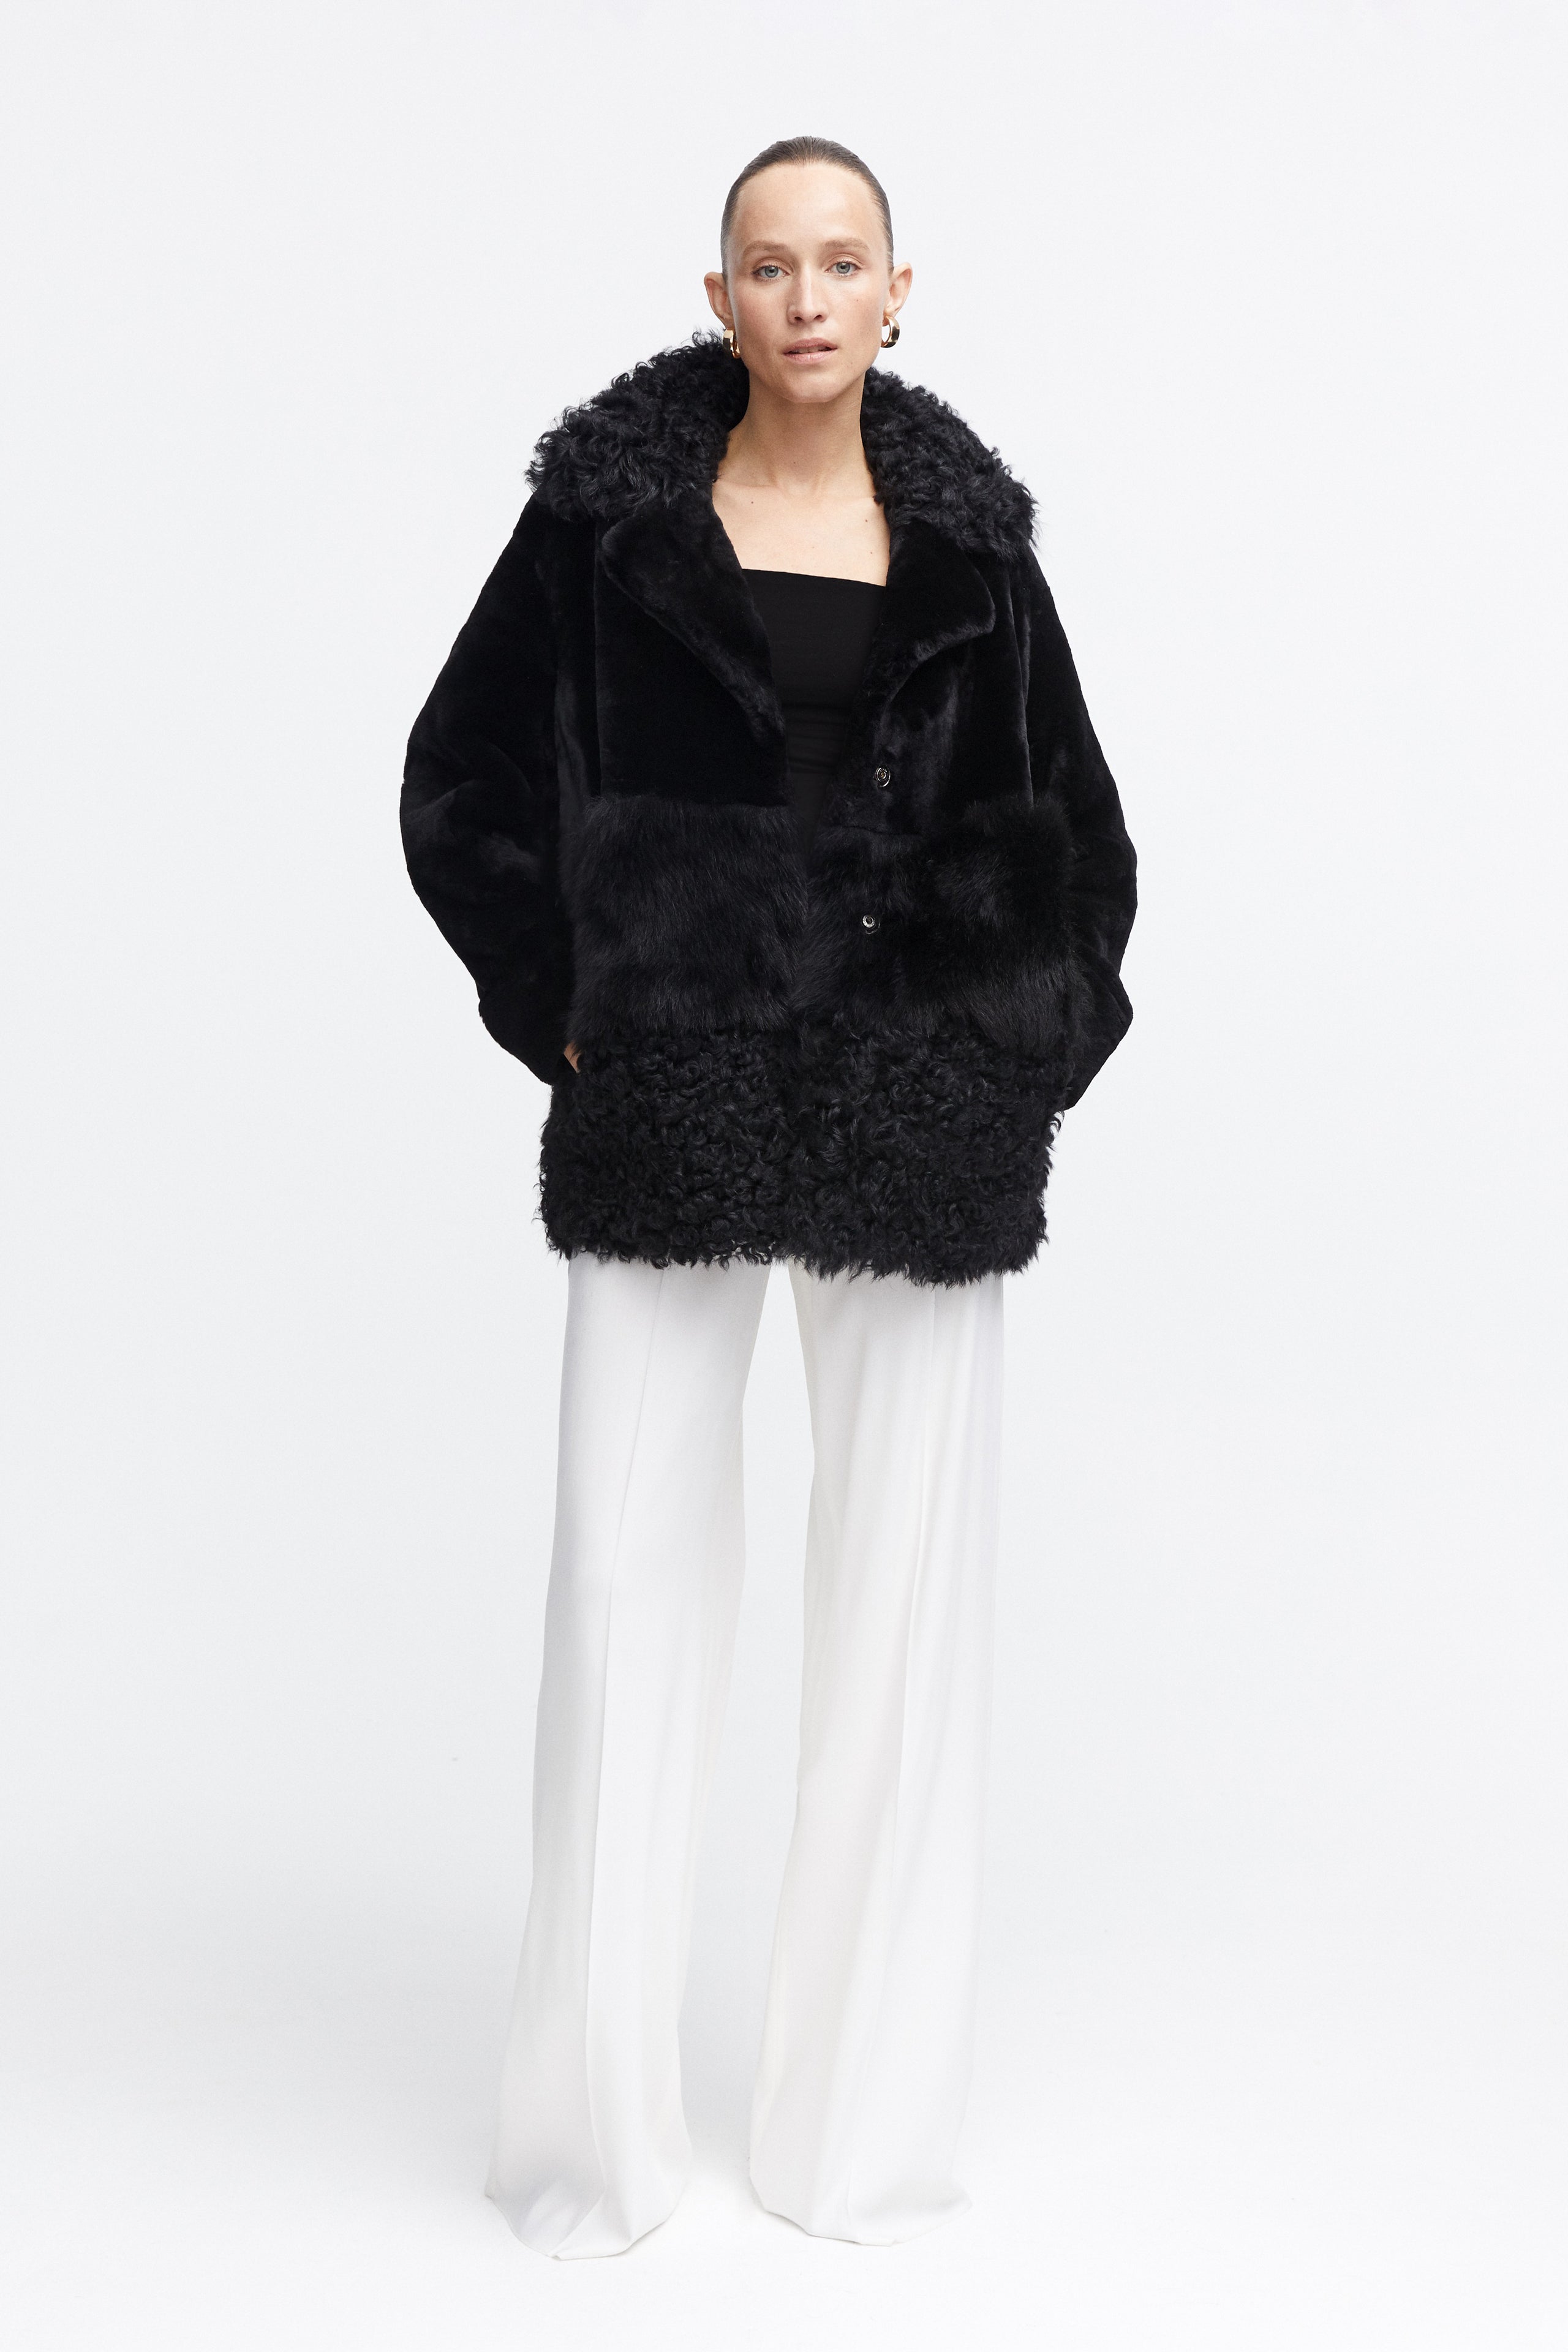 Model is wearing the Anouk Black Luxurious Shearling Coat Front